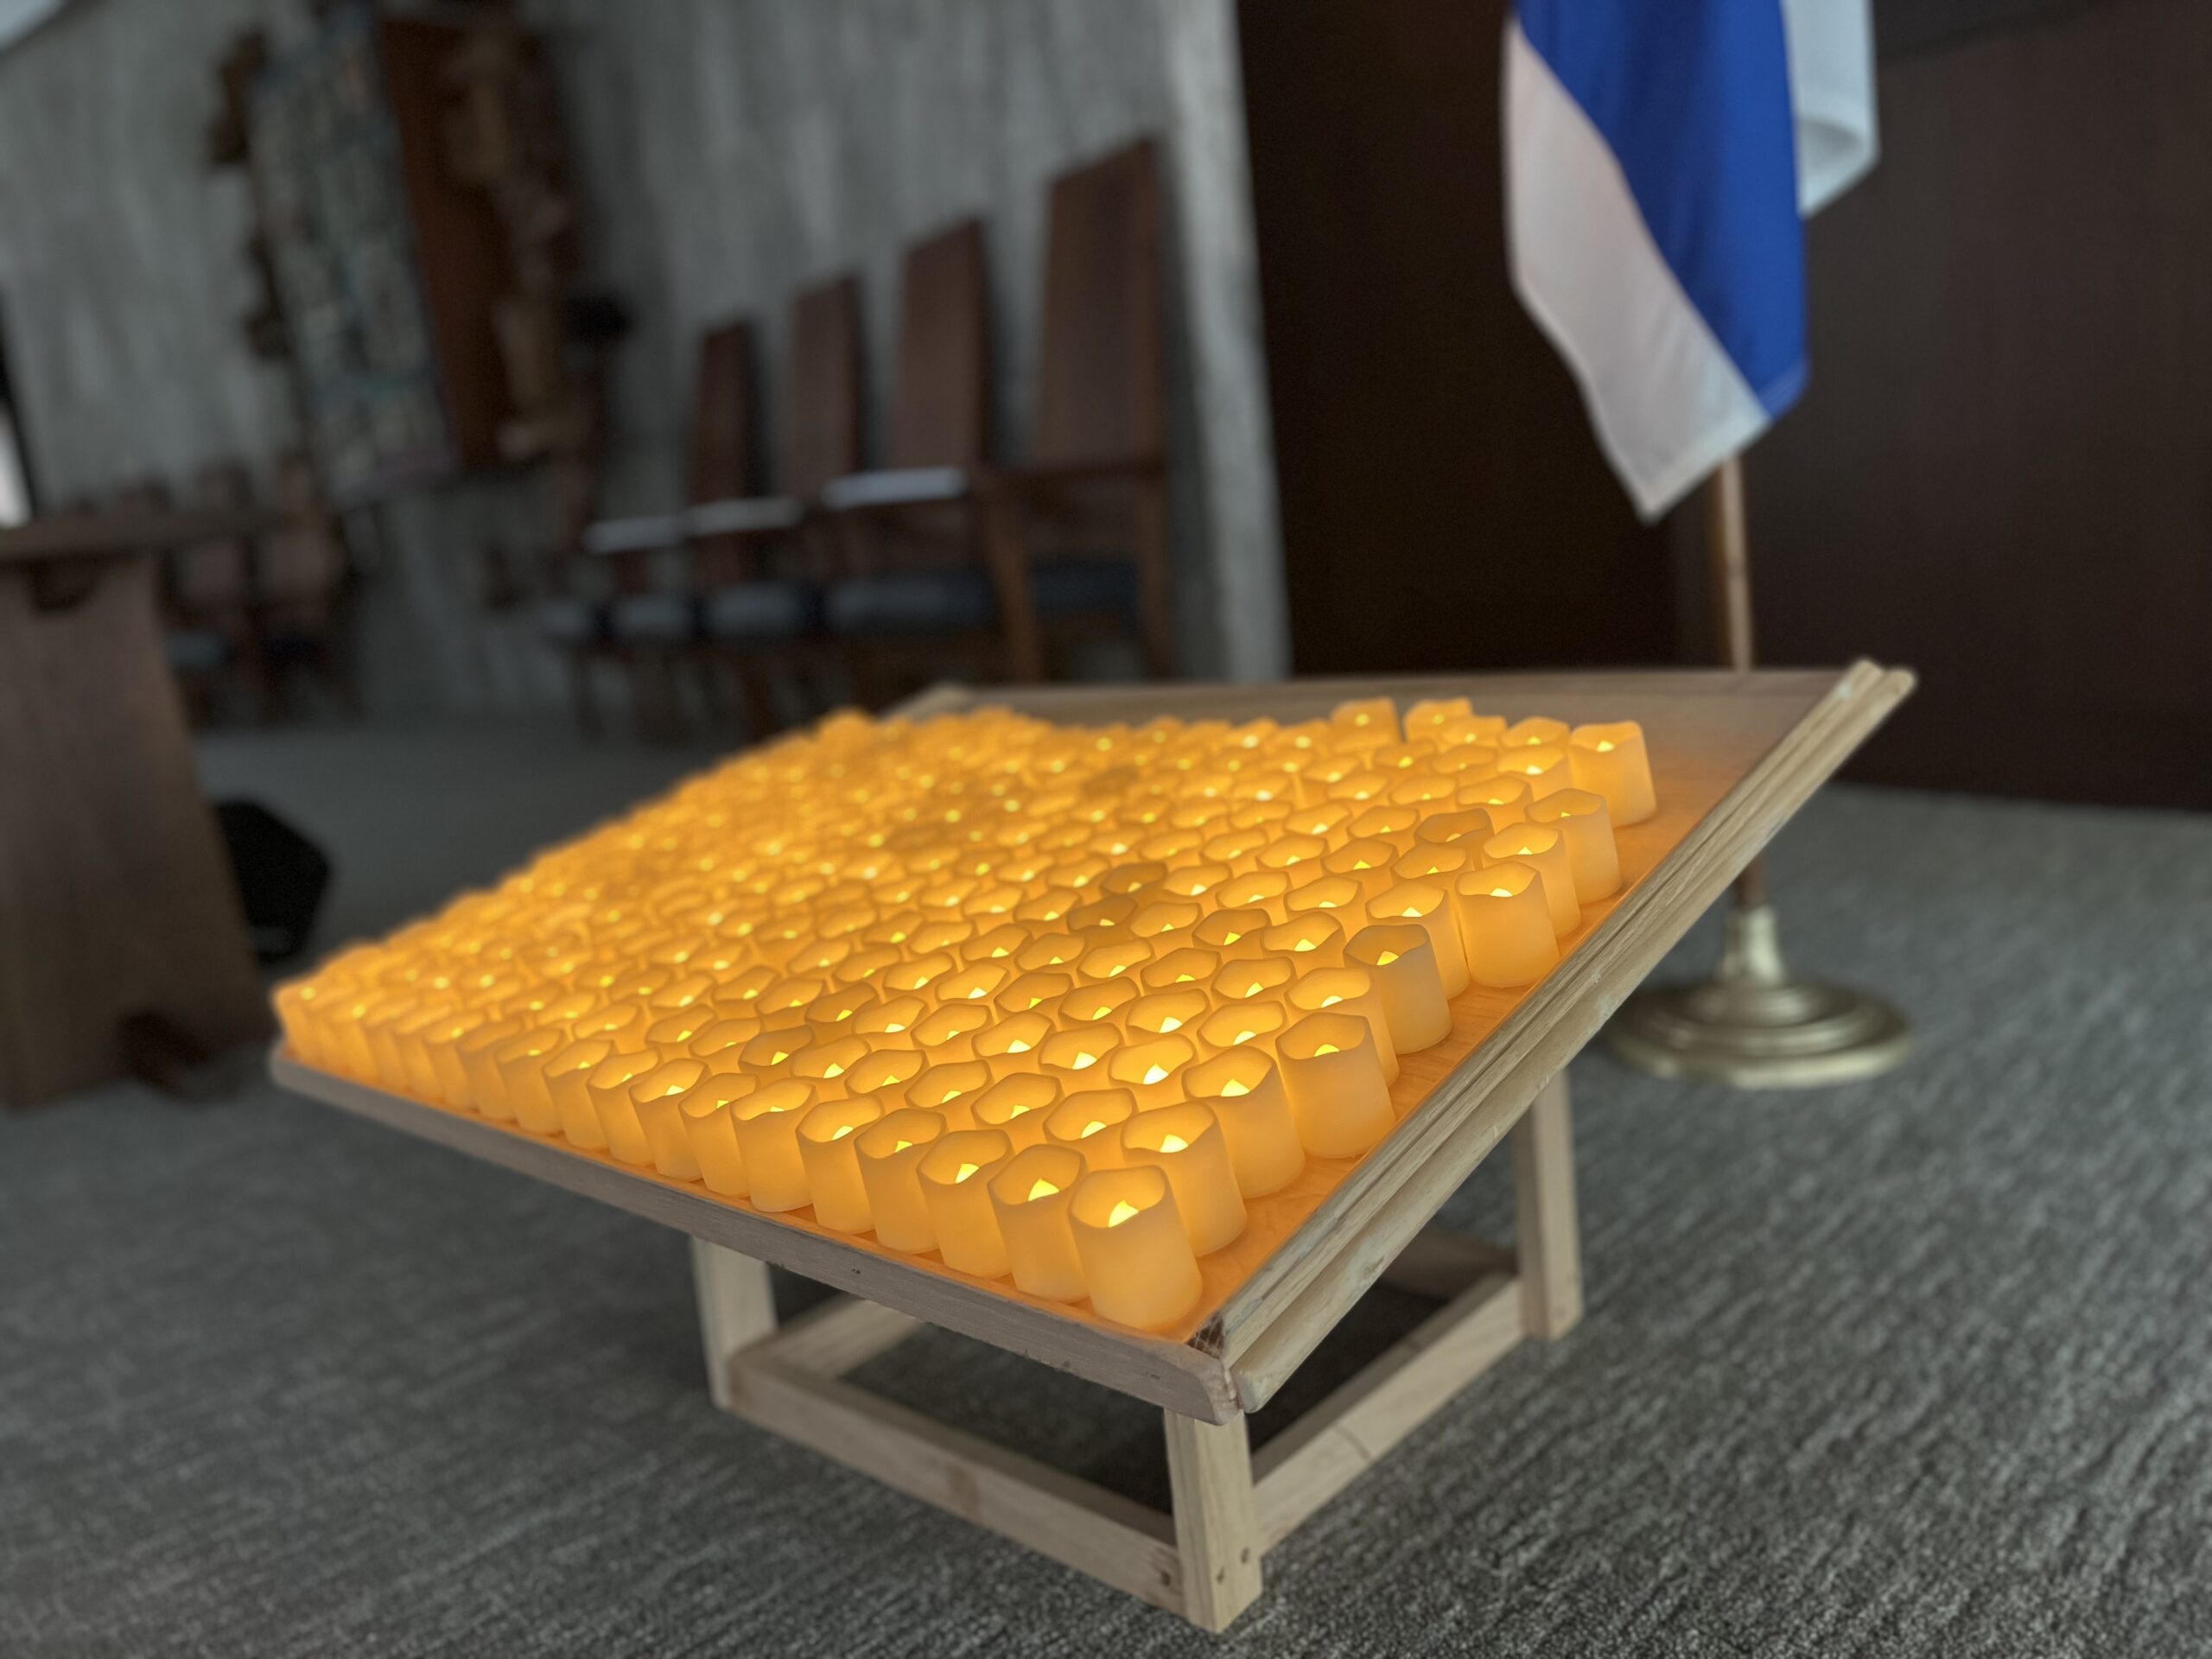 Bring Them Home Now. A vigil of candles sits on our sanctuary’s bimah for the hostages held by Hamas and its partners in Gaza.